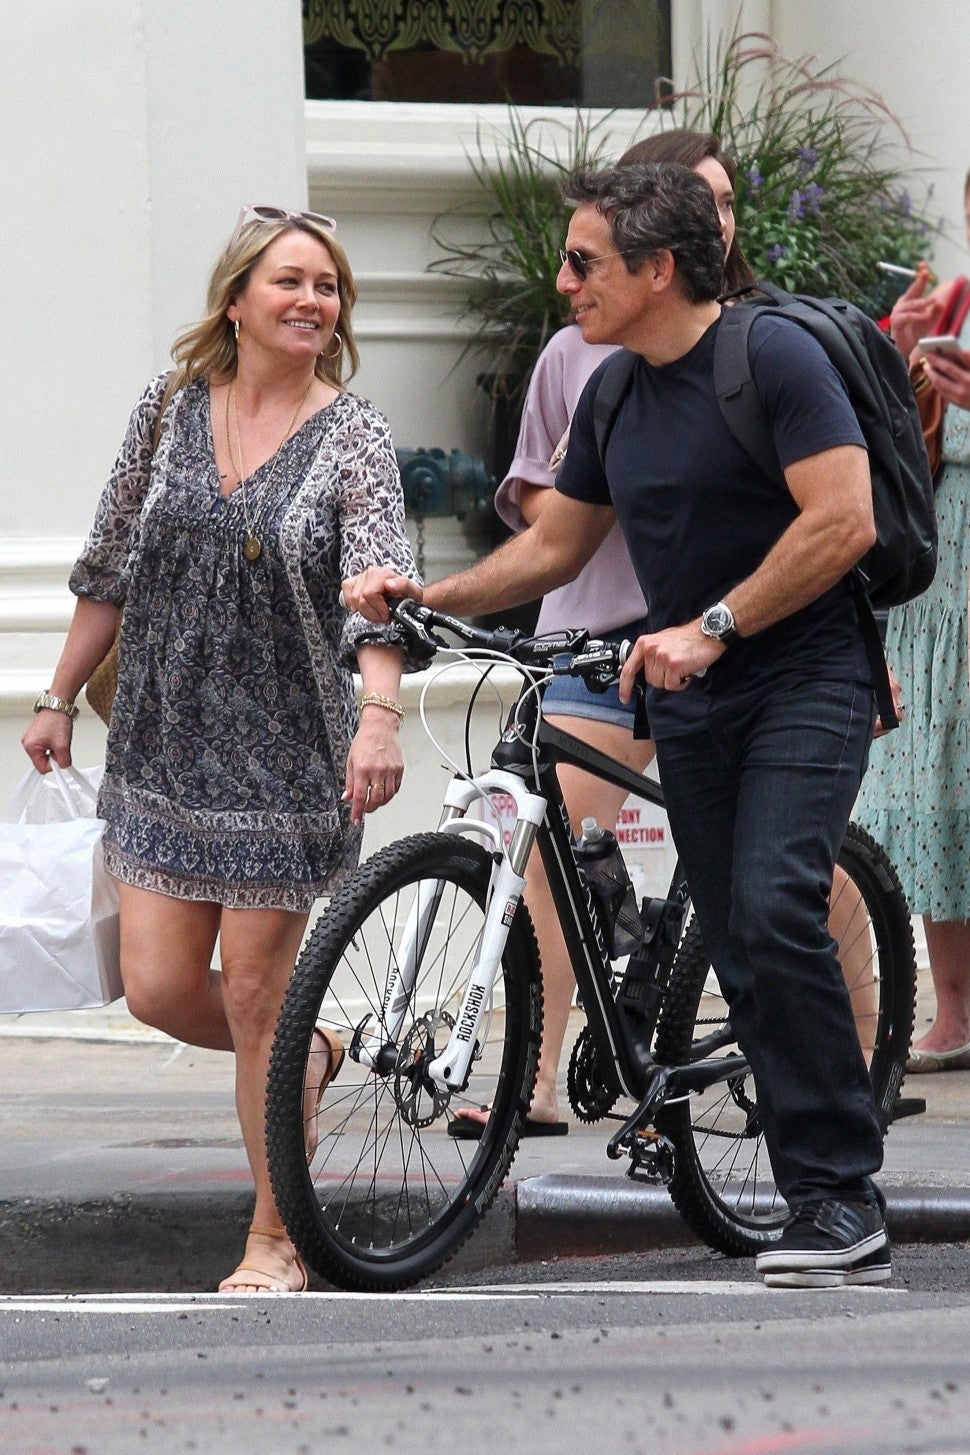 Ben Stiller and Christine Taylor are seen together in public for the first time since their split last year. The former couple had a two hour lunch at a Tribeca restaurant, they both exited and looked to be having a great time together as they were seen laughing before they went separate ways.